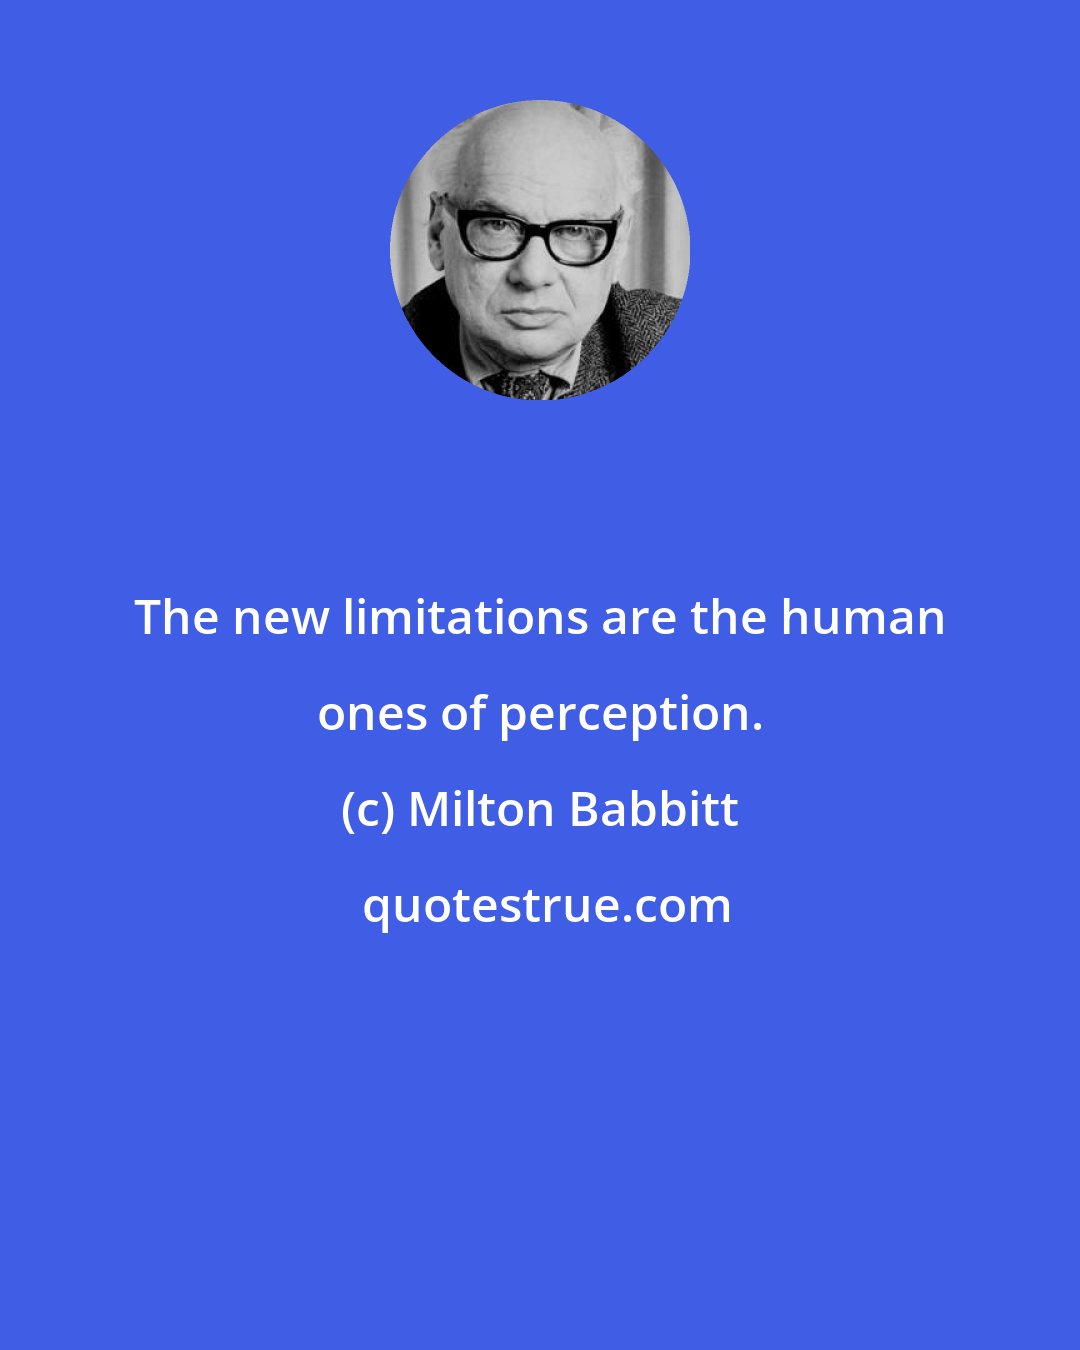 Milton Babbitt: The new limitations are the human ones of perception.